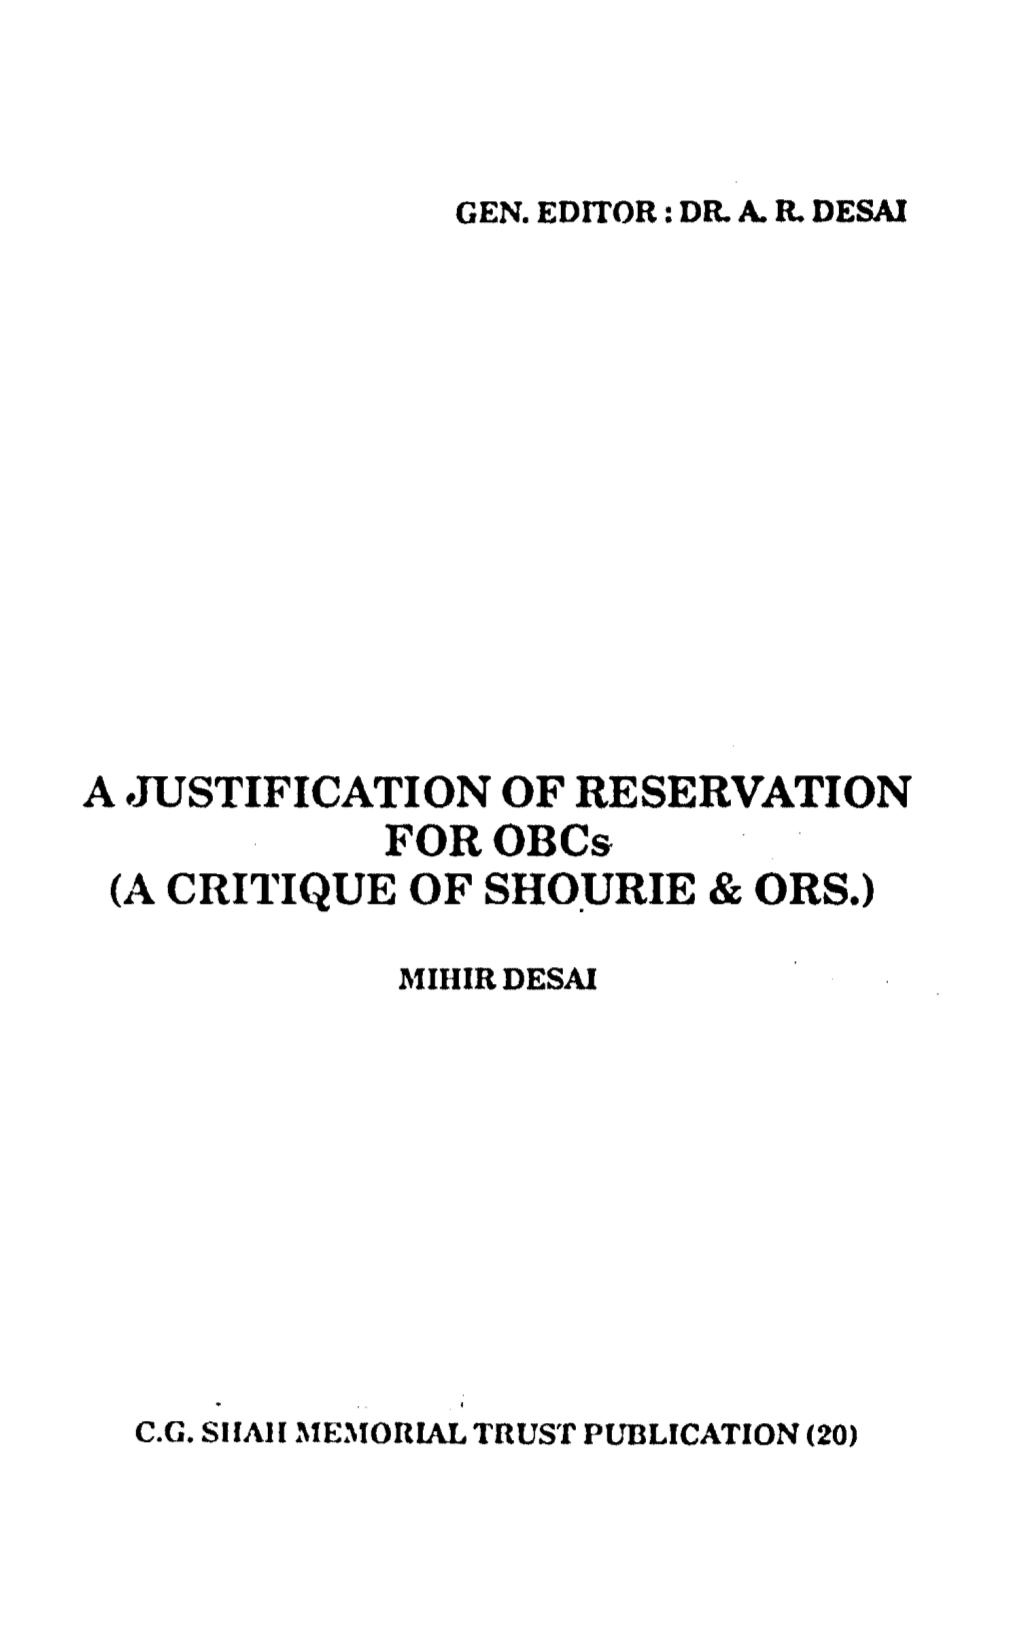 A ,JUSTIFICATION of RESERVATION Forobcs (A CRI1''ique of SHO:URIE & ORS.)